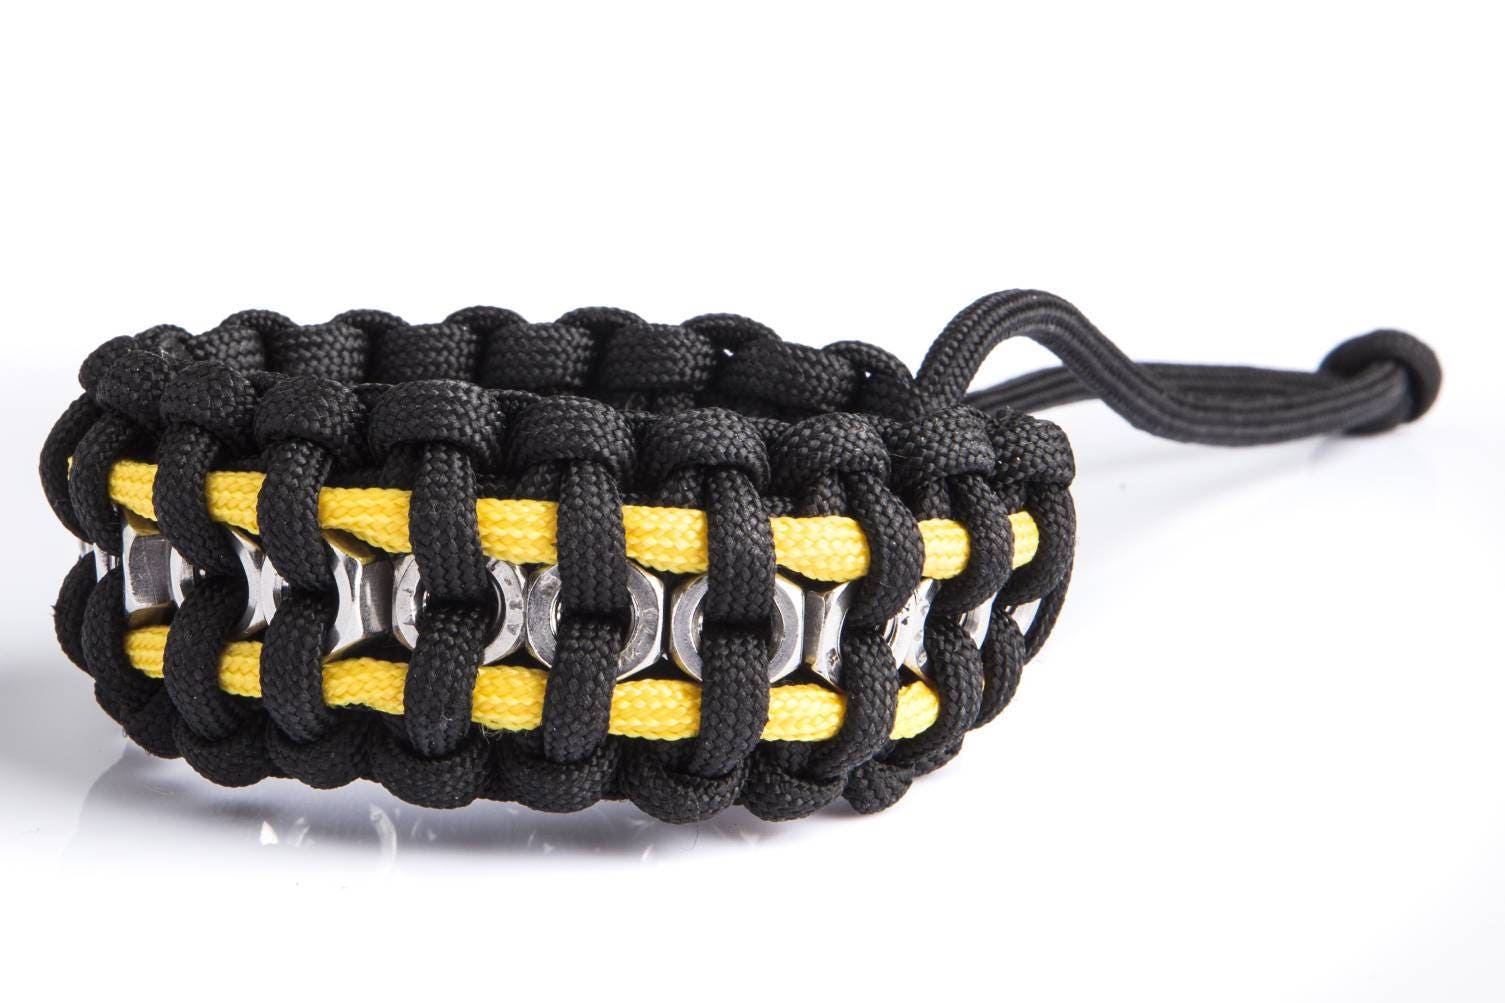 Handmade Stainless Steel Paracord Cuff Deutsch Bracelet With Multi Color  Buckle Clasp From Wh_fashionjewelry, $1.21